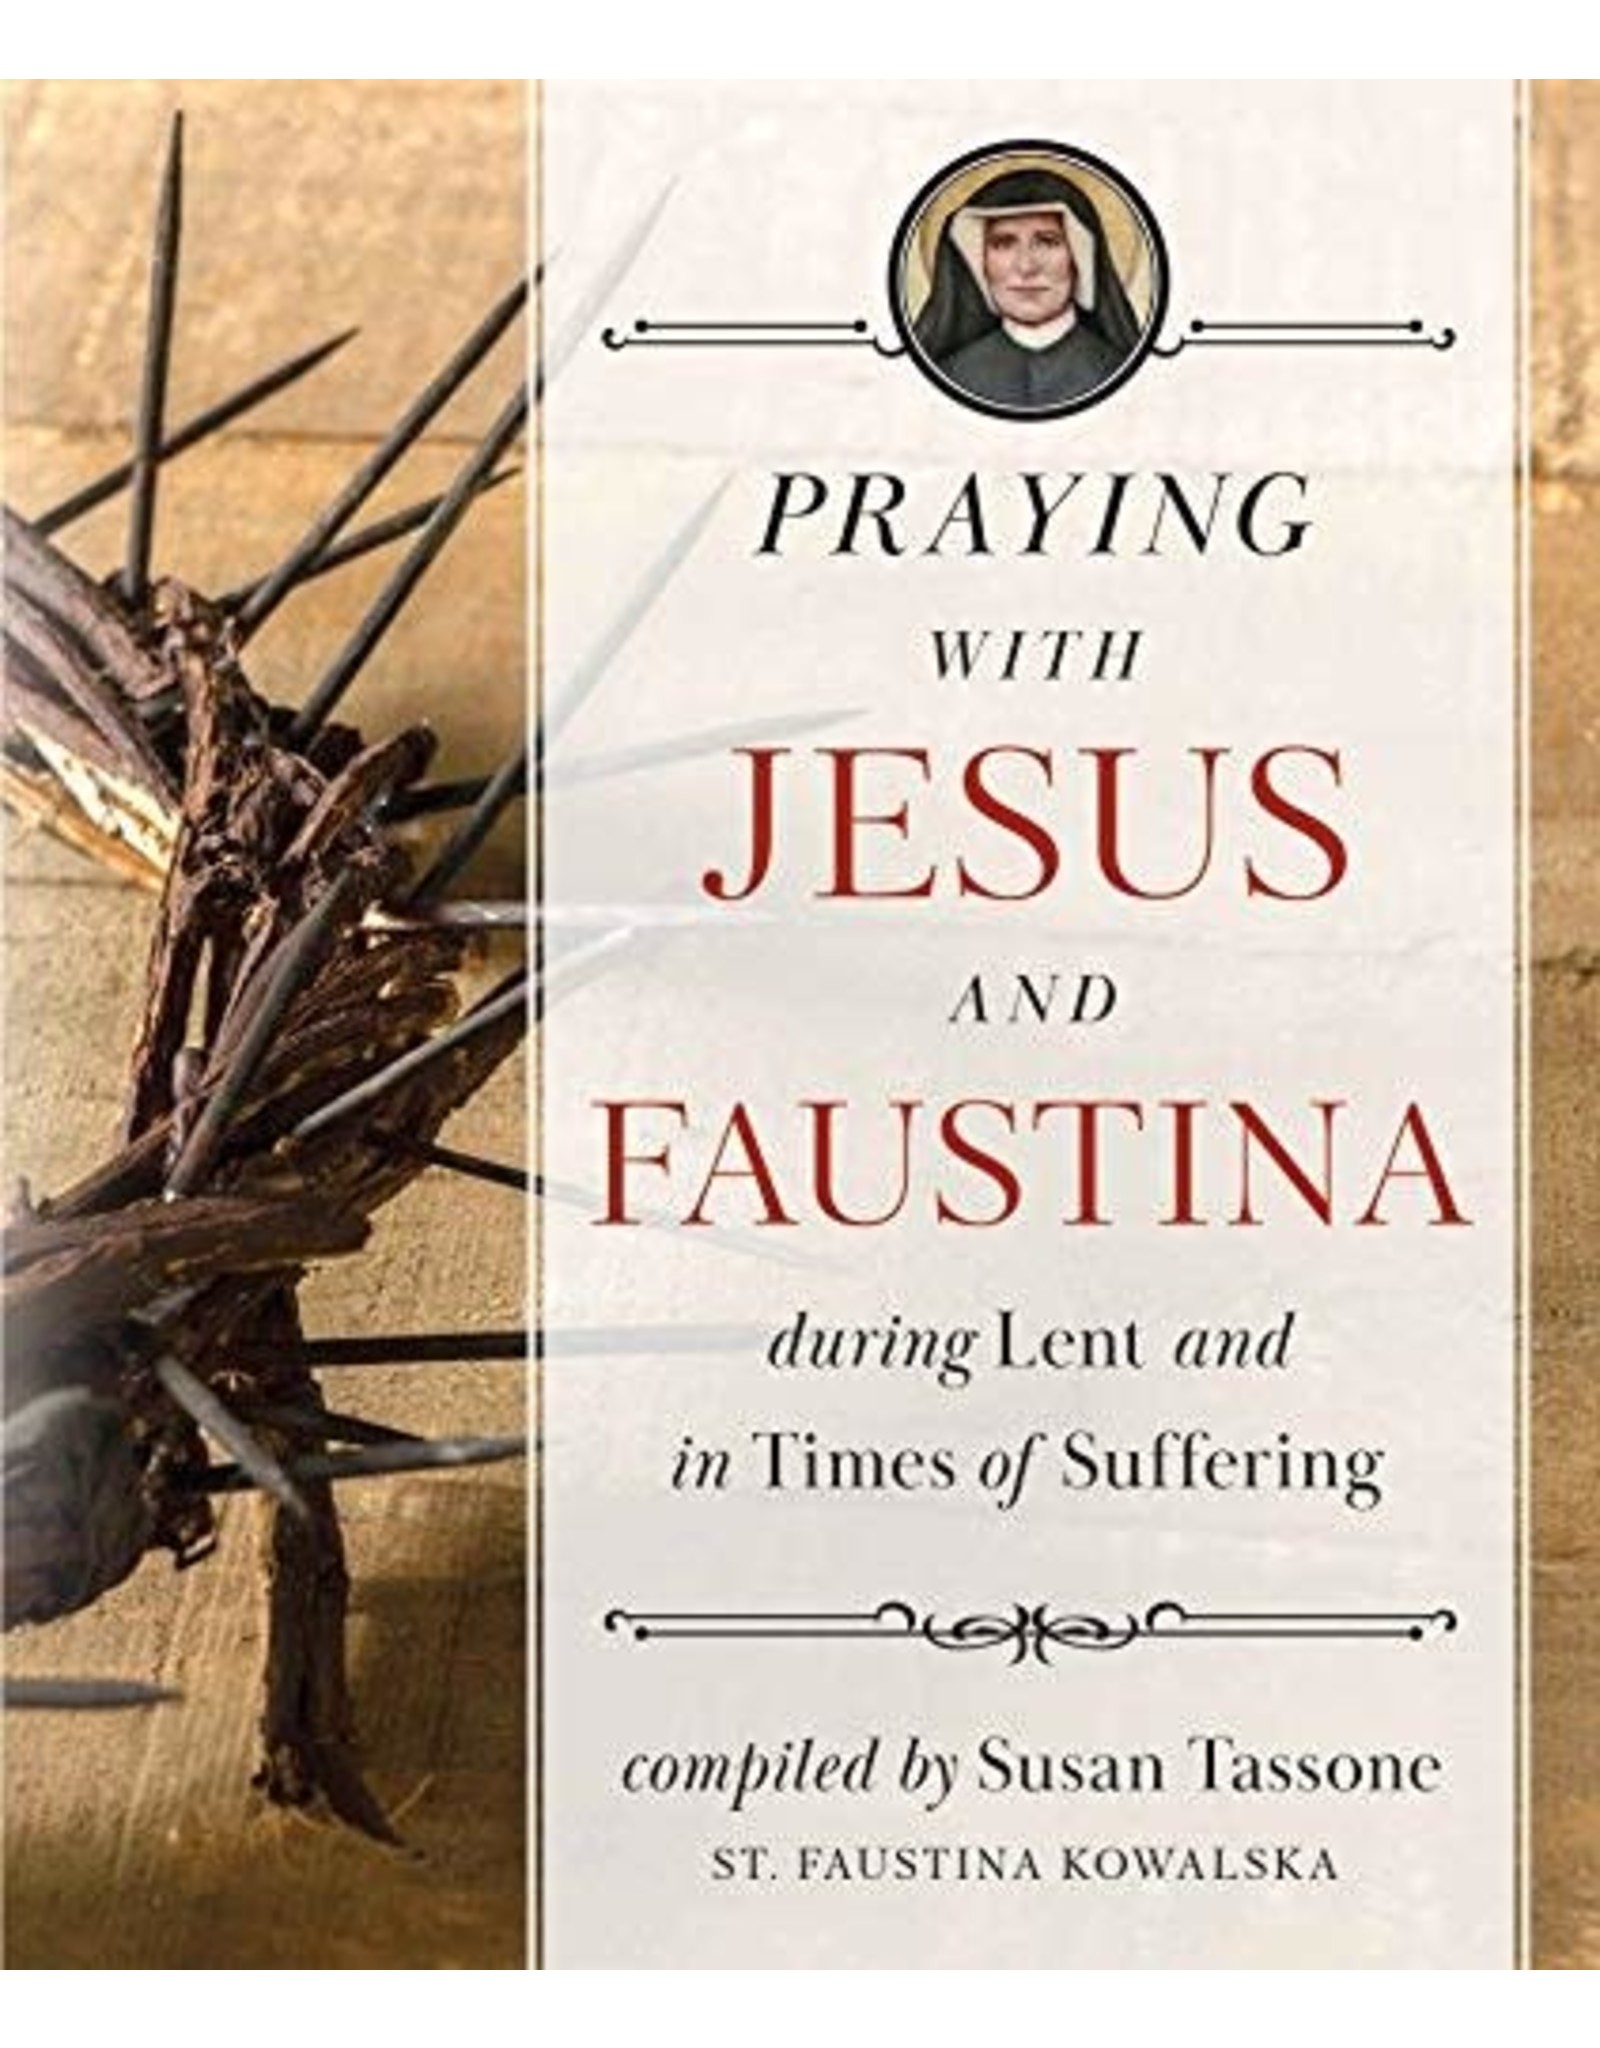 Sophia Press Praying with Jesus and Faustina During Lent and in Times of Suffering complied by Susan Tassone